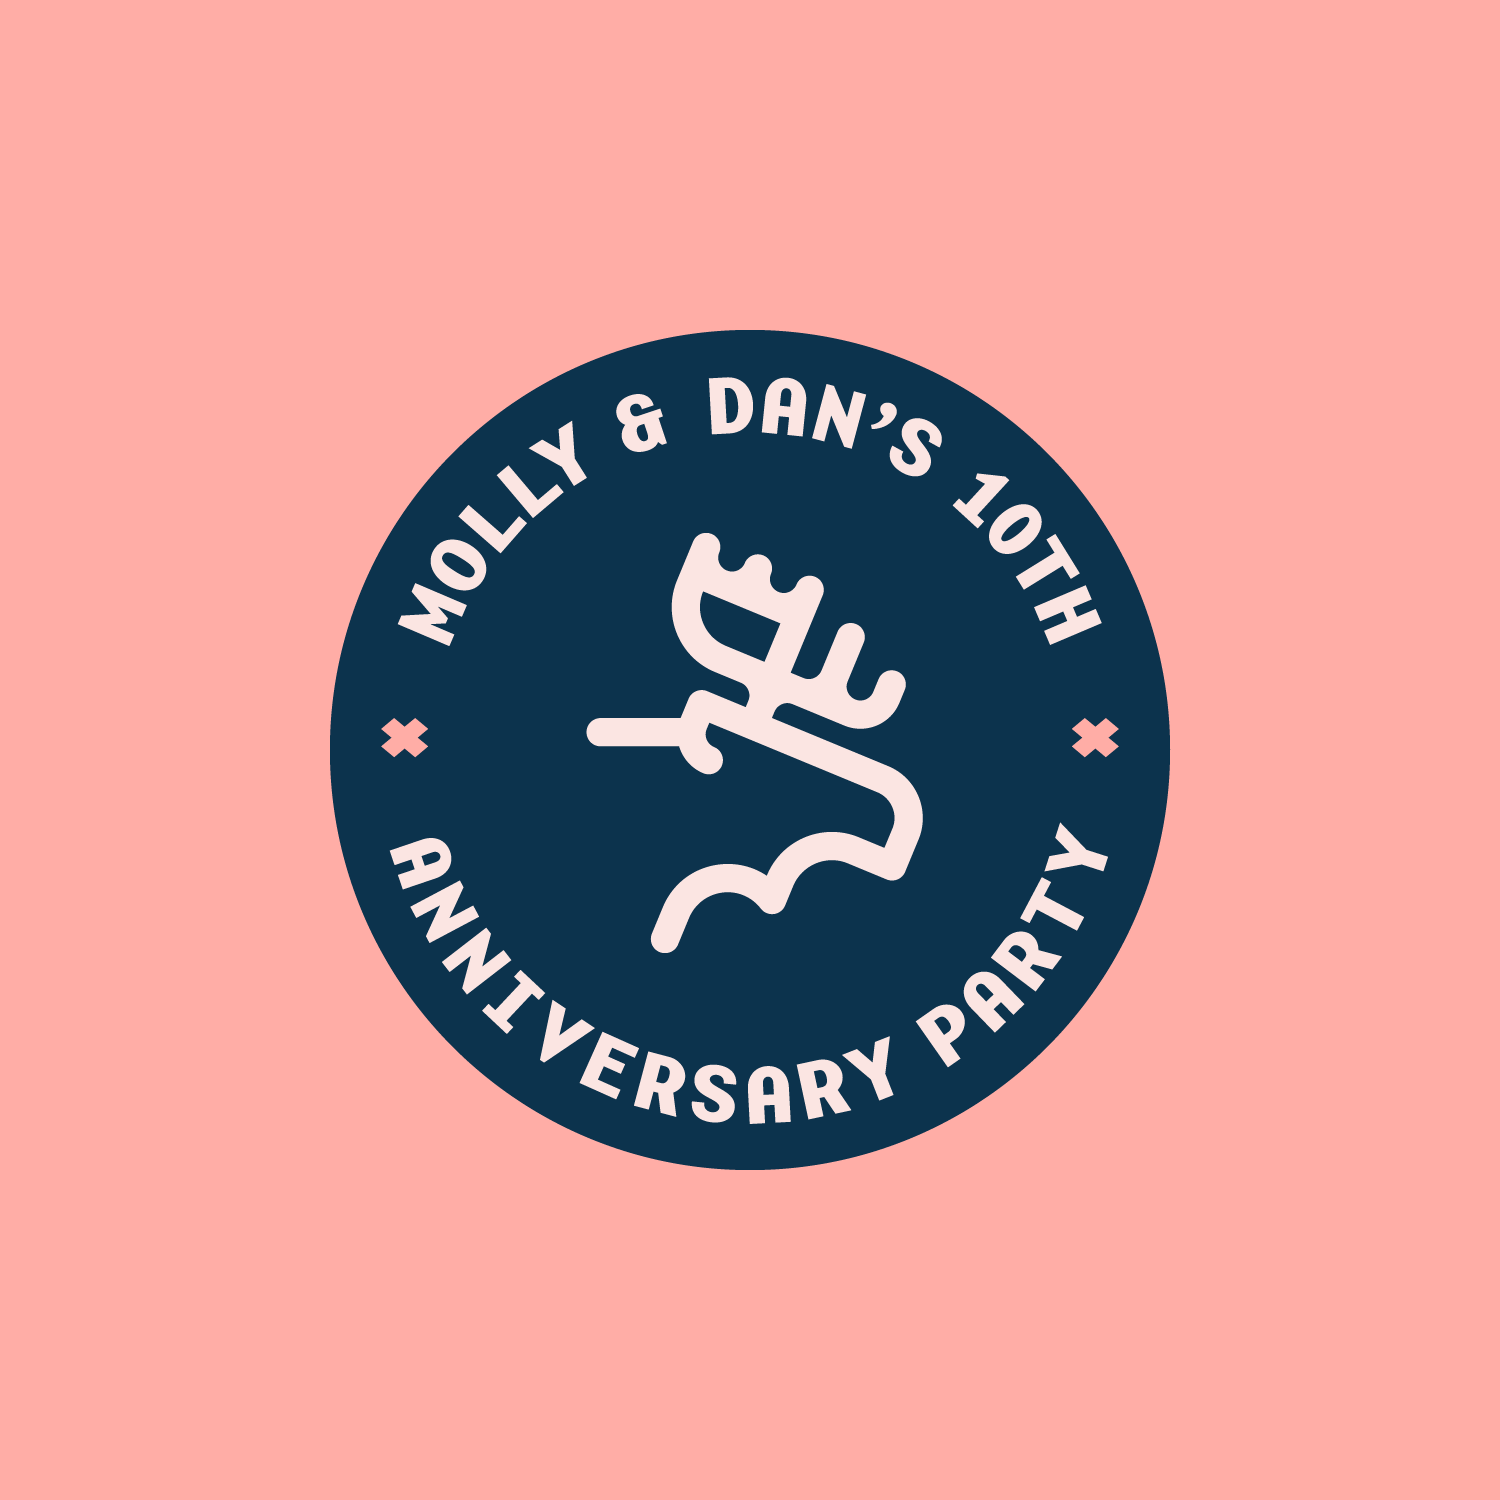 Badge design displaying the moose symbol and 'Molly & Dan 10th Anniverary Party' text